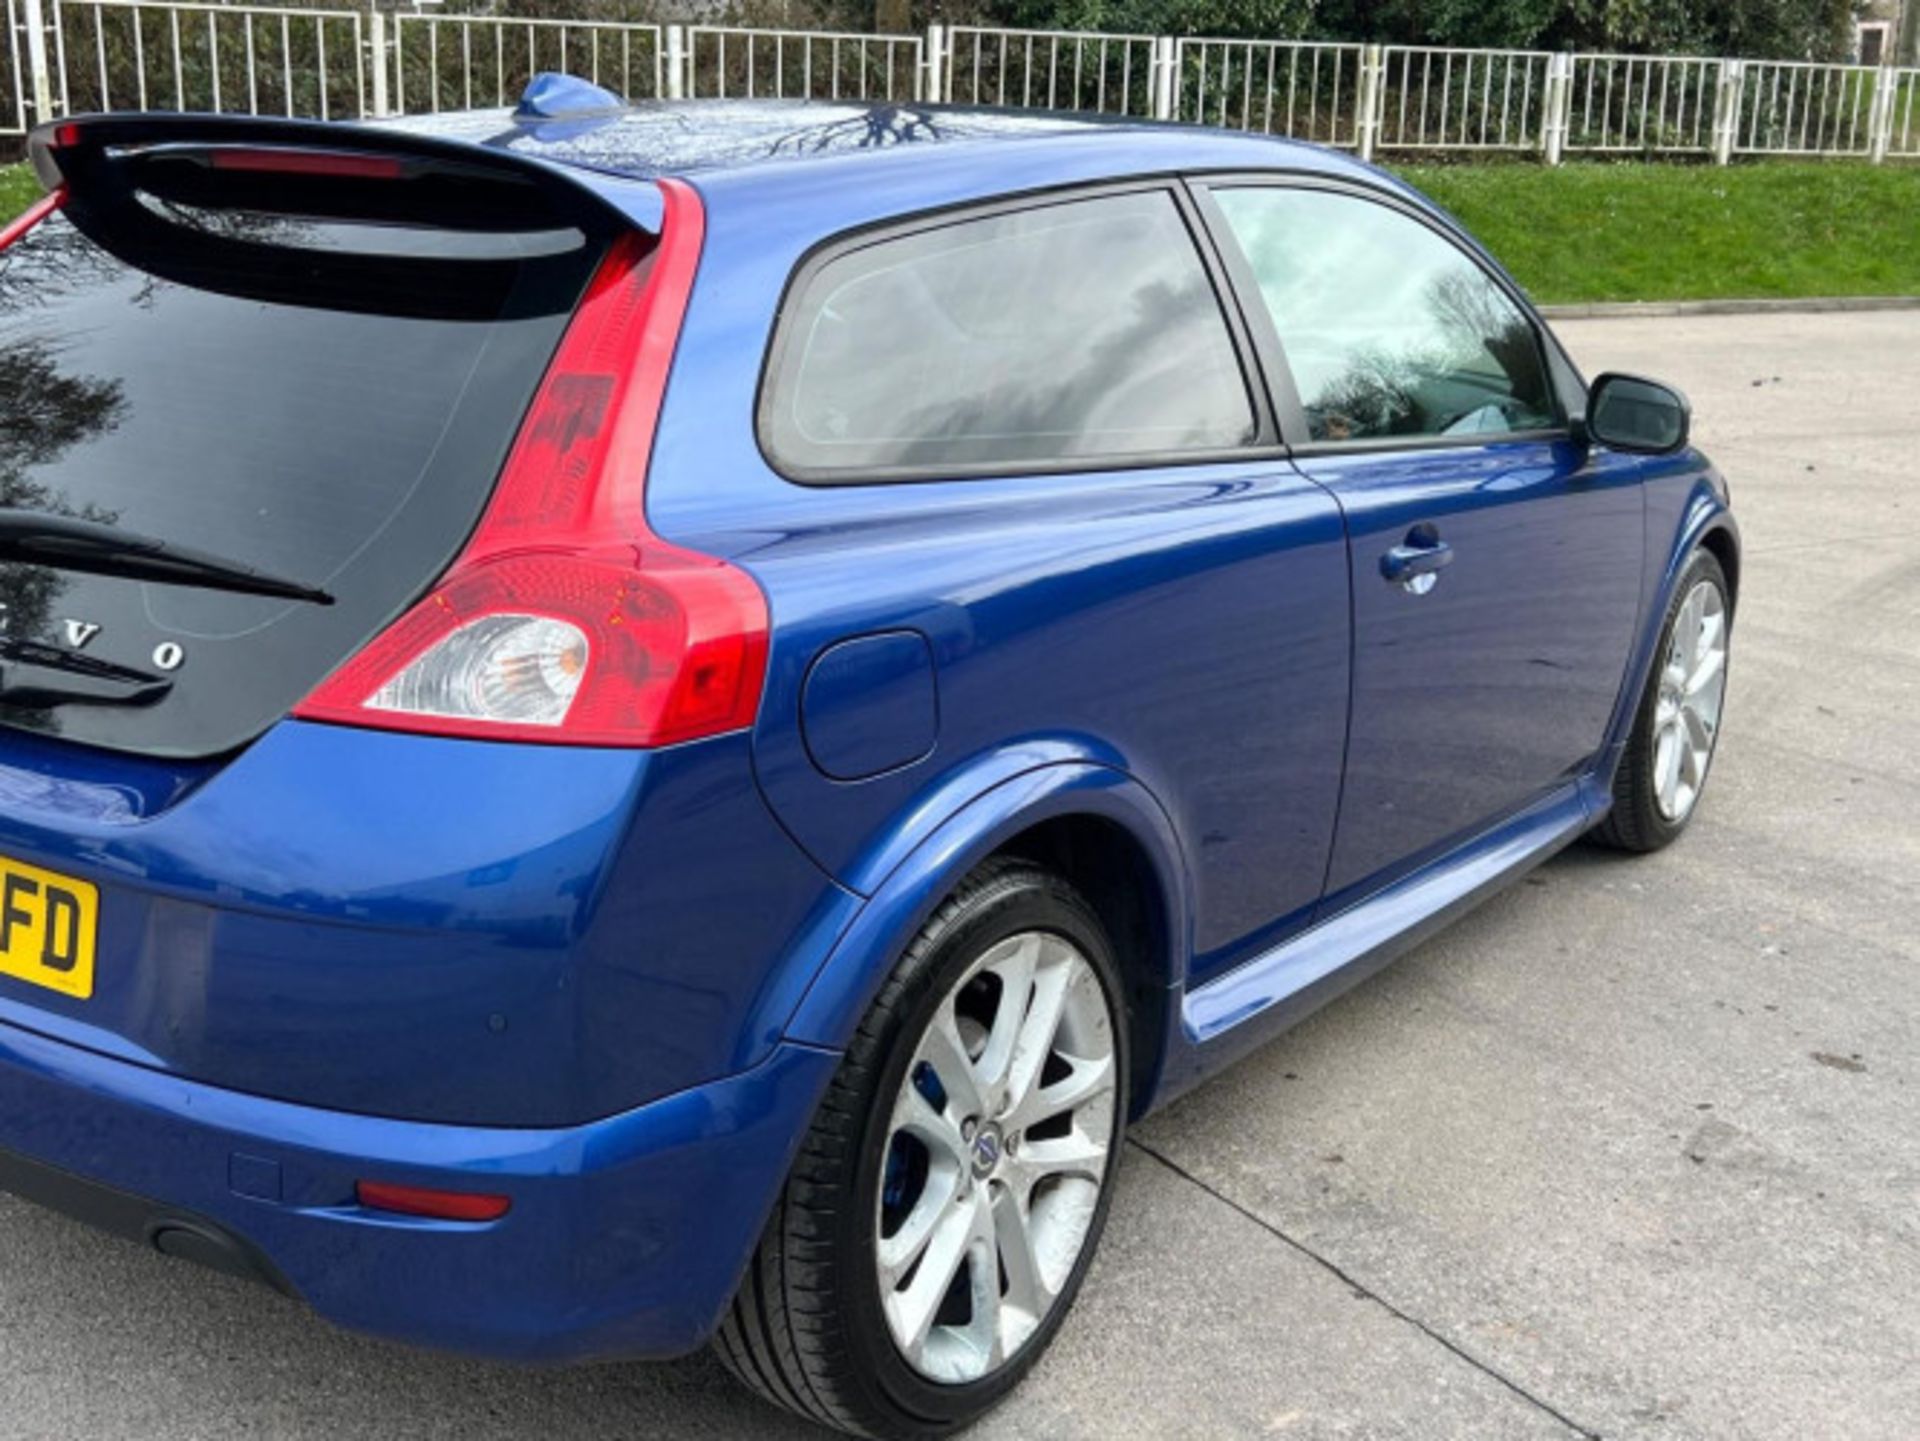 VOLVO C30 2.0D R-DESIGN SPORT 2DR - SPORTY AND LUXURIOUS COMPACT CAR >>--NO VAT ON HAMMER--<< - Image 85 of 103